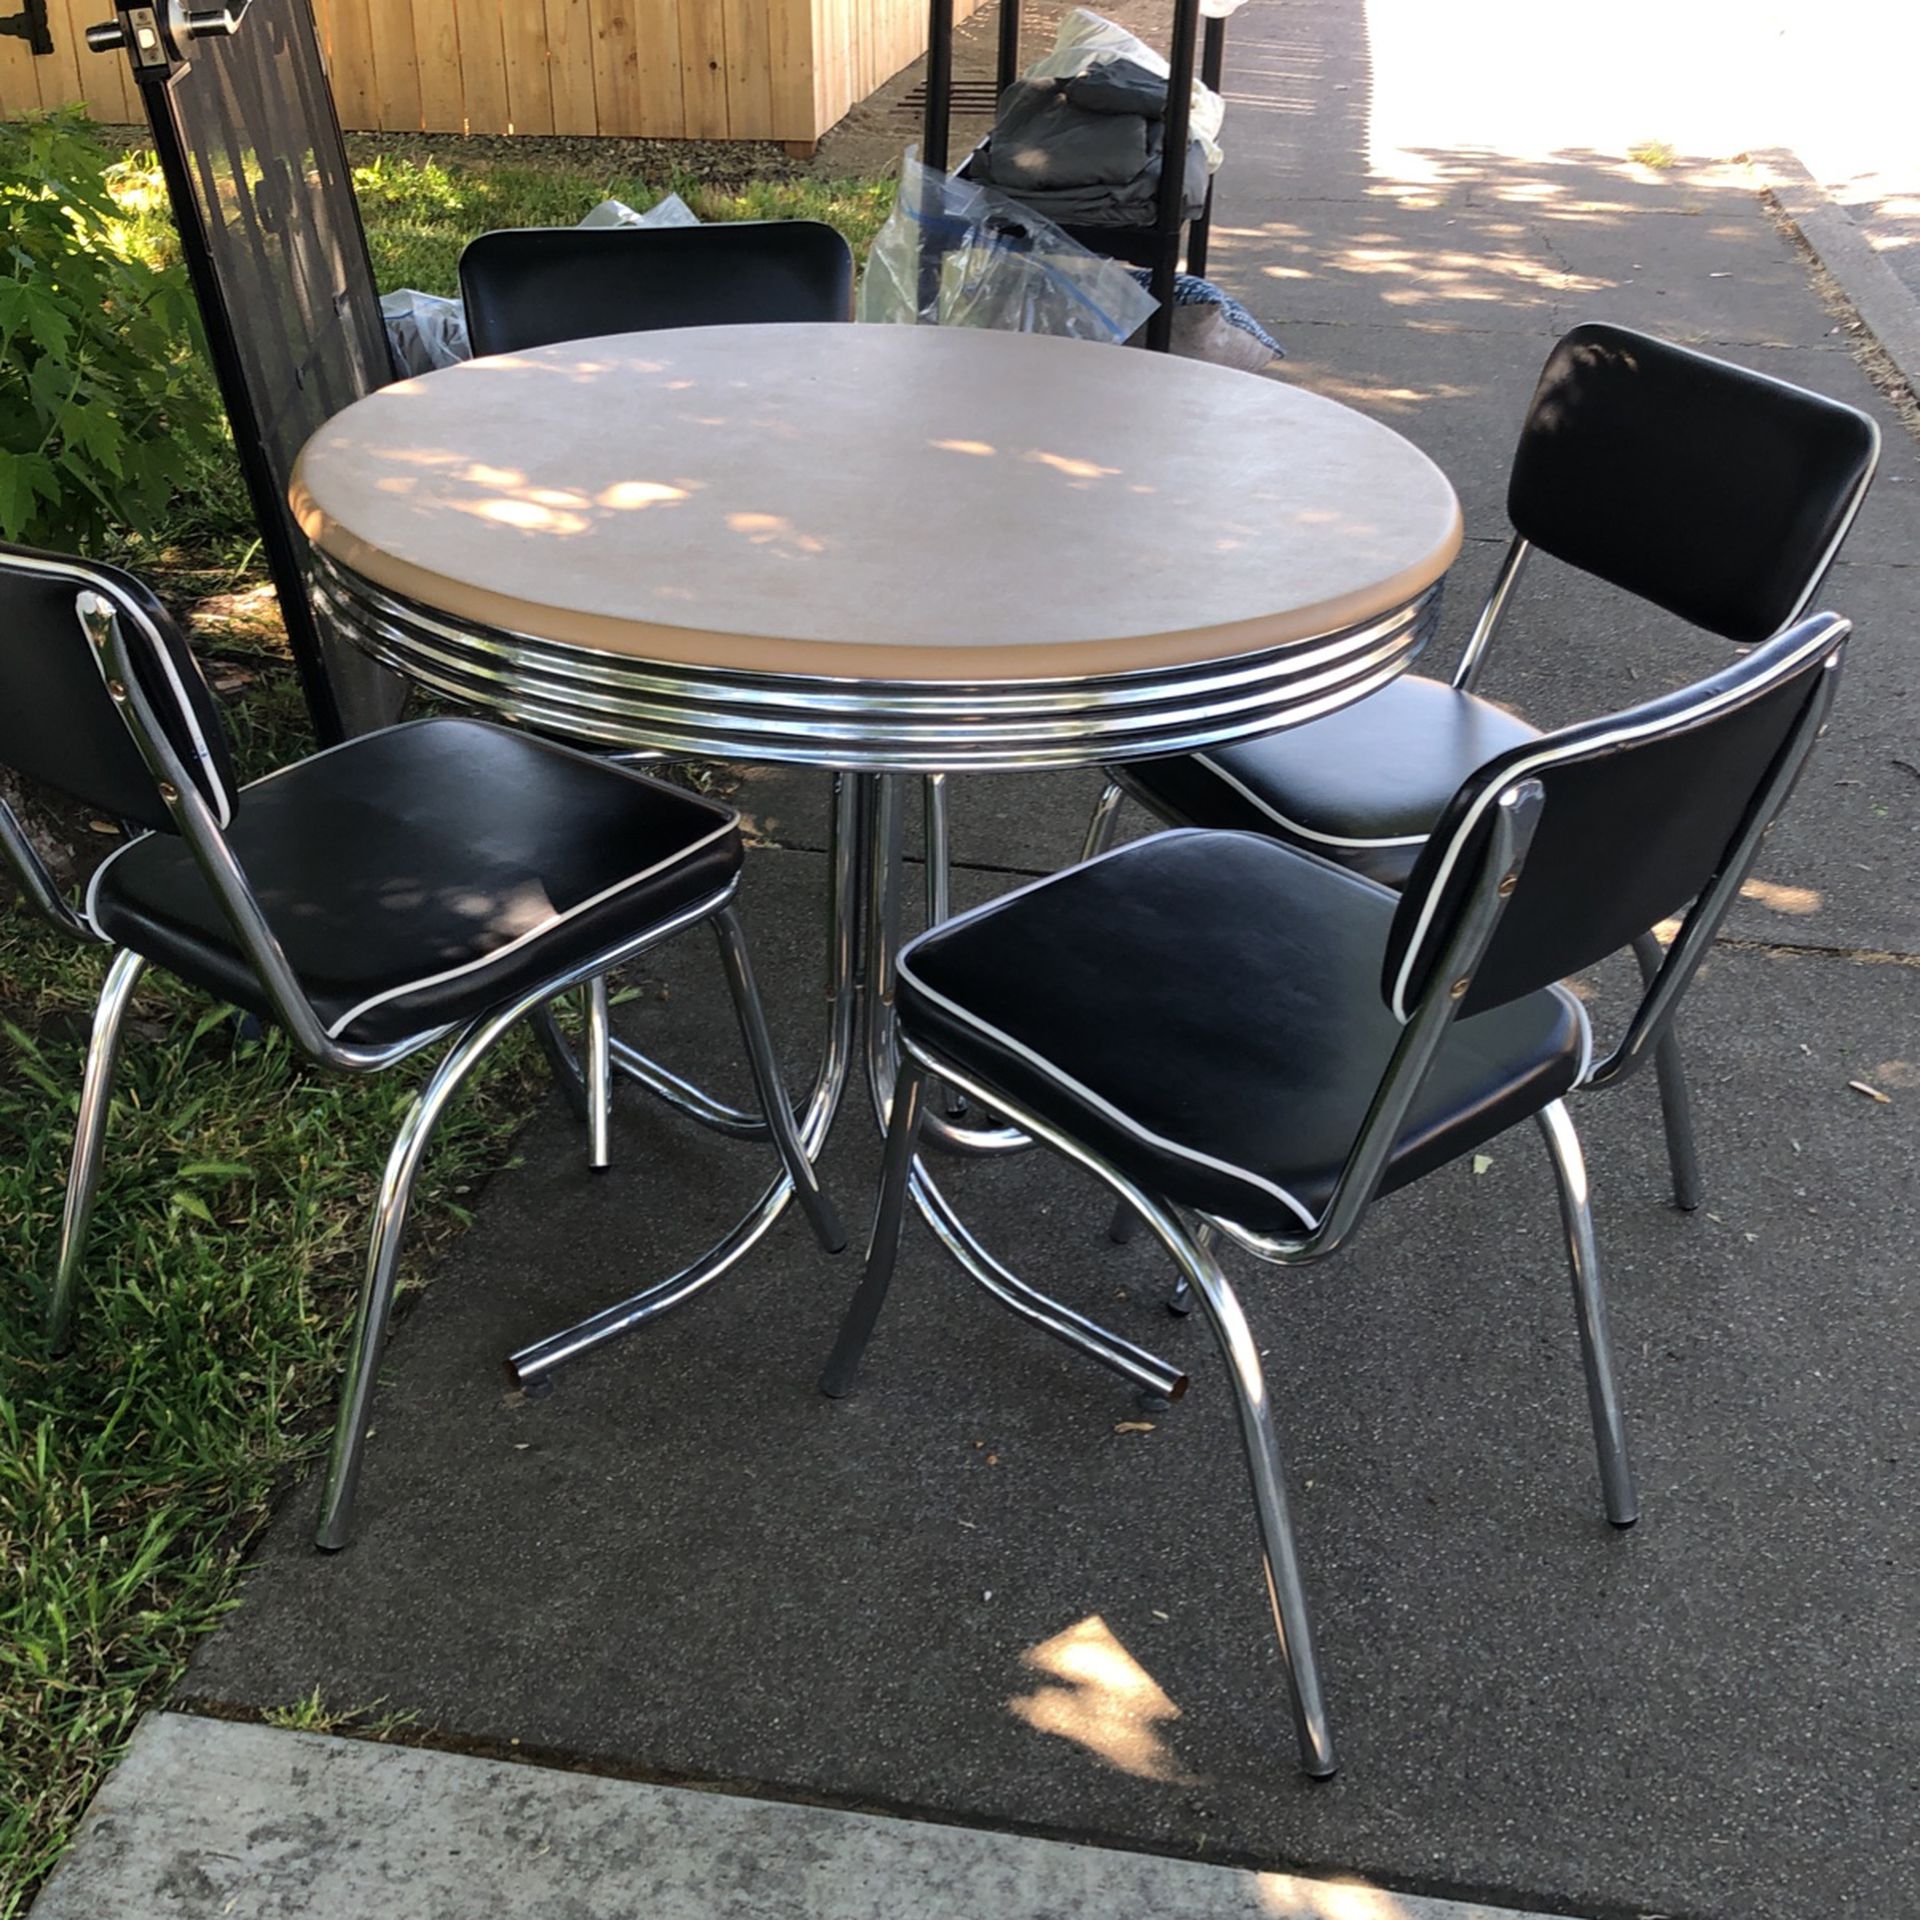 Retro Style 5 Piece Round Dinning Table And Chairs